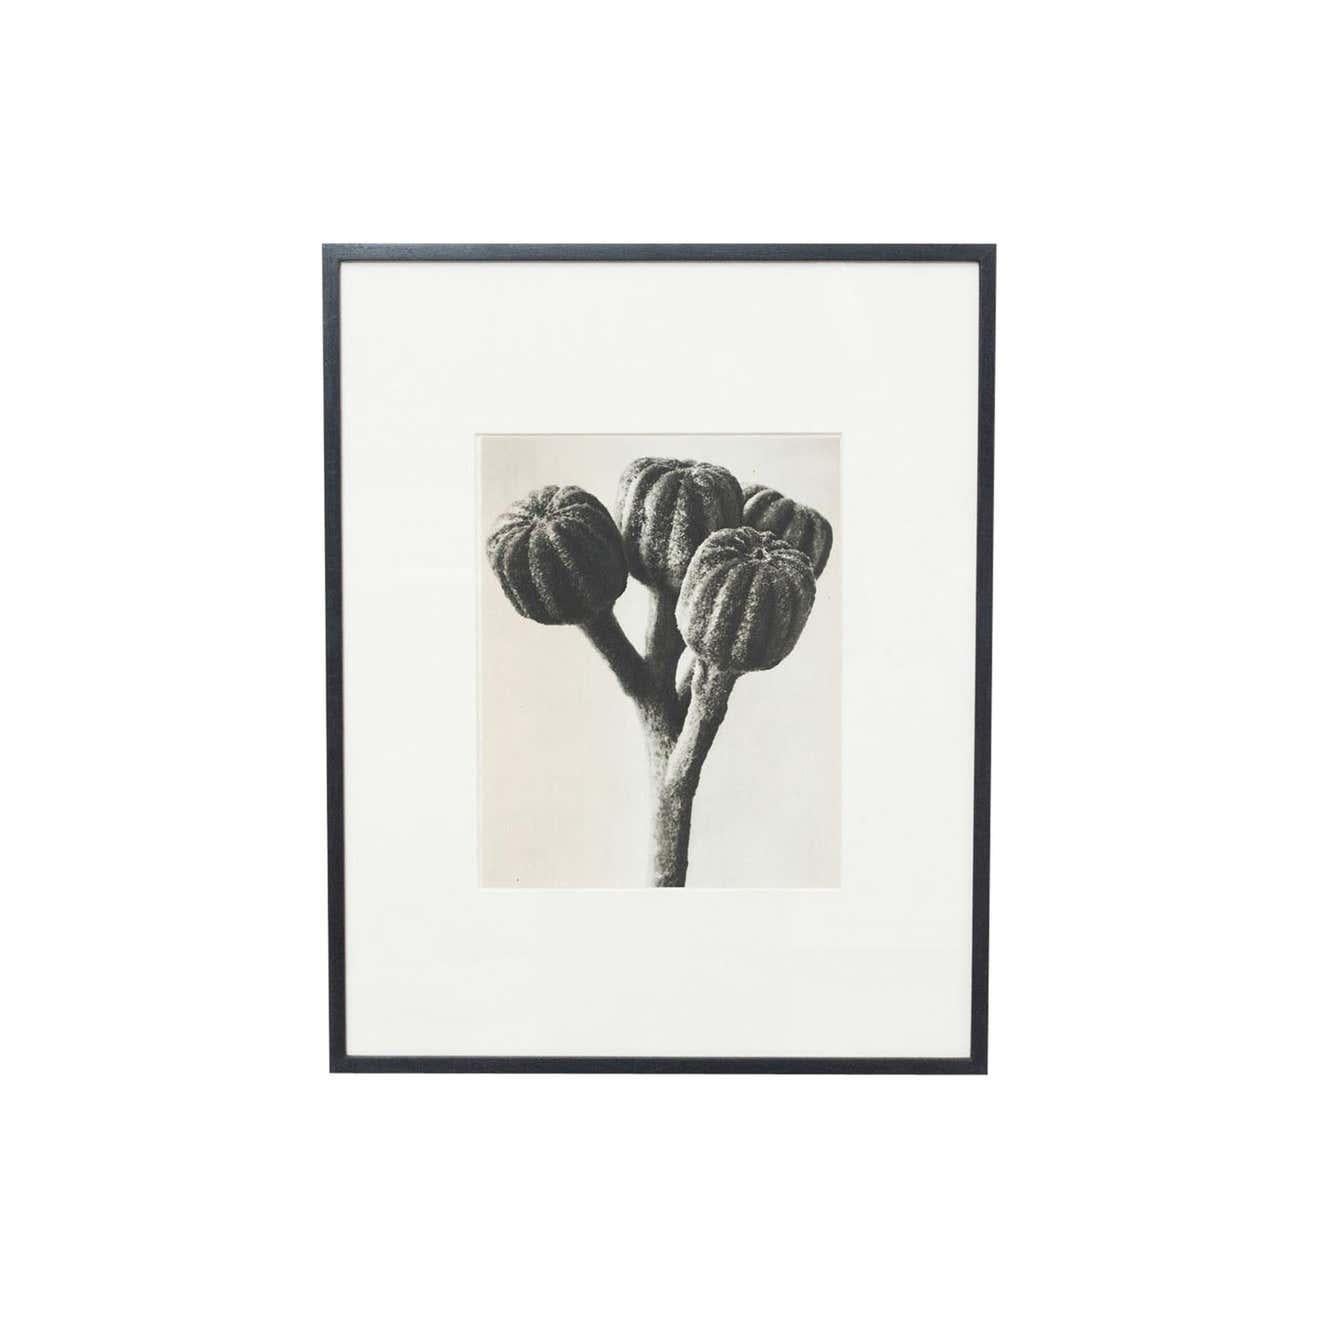 Immerse yourself in the captivating world of Karl Blossfeldt with this set of 6 framed photogravures from the 1942 edition of the book 'Wunder in der Natur.' Blossfeldt, a German photographer, sculptor, and artist, left an indelible mark with his